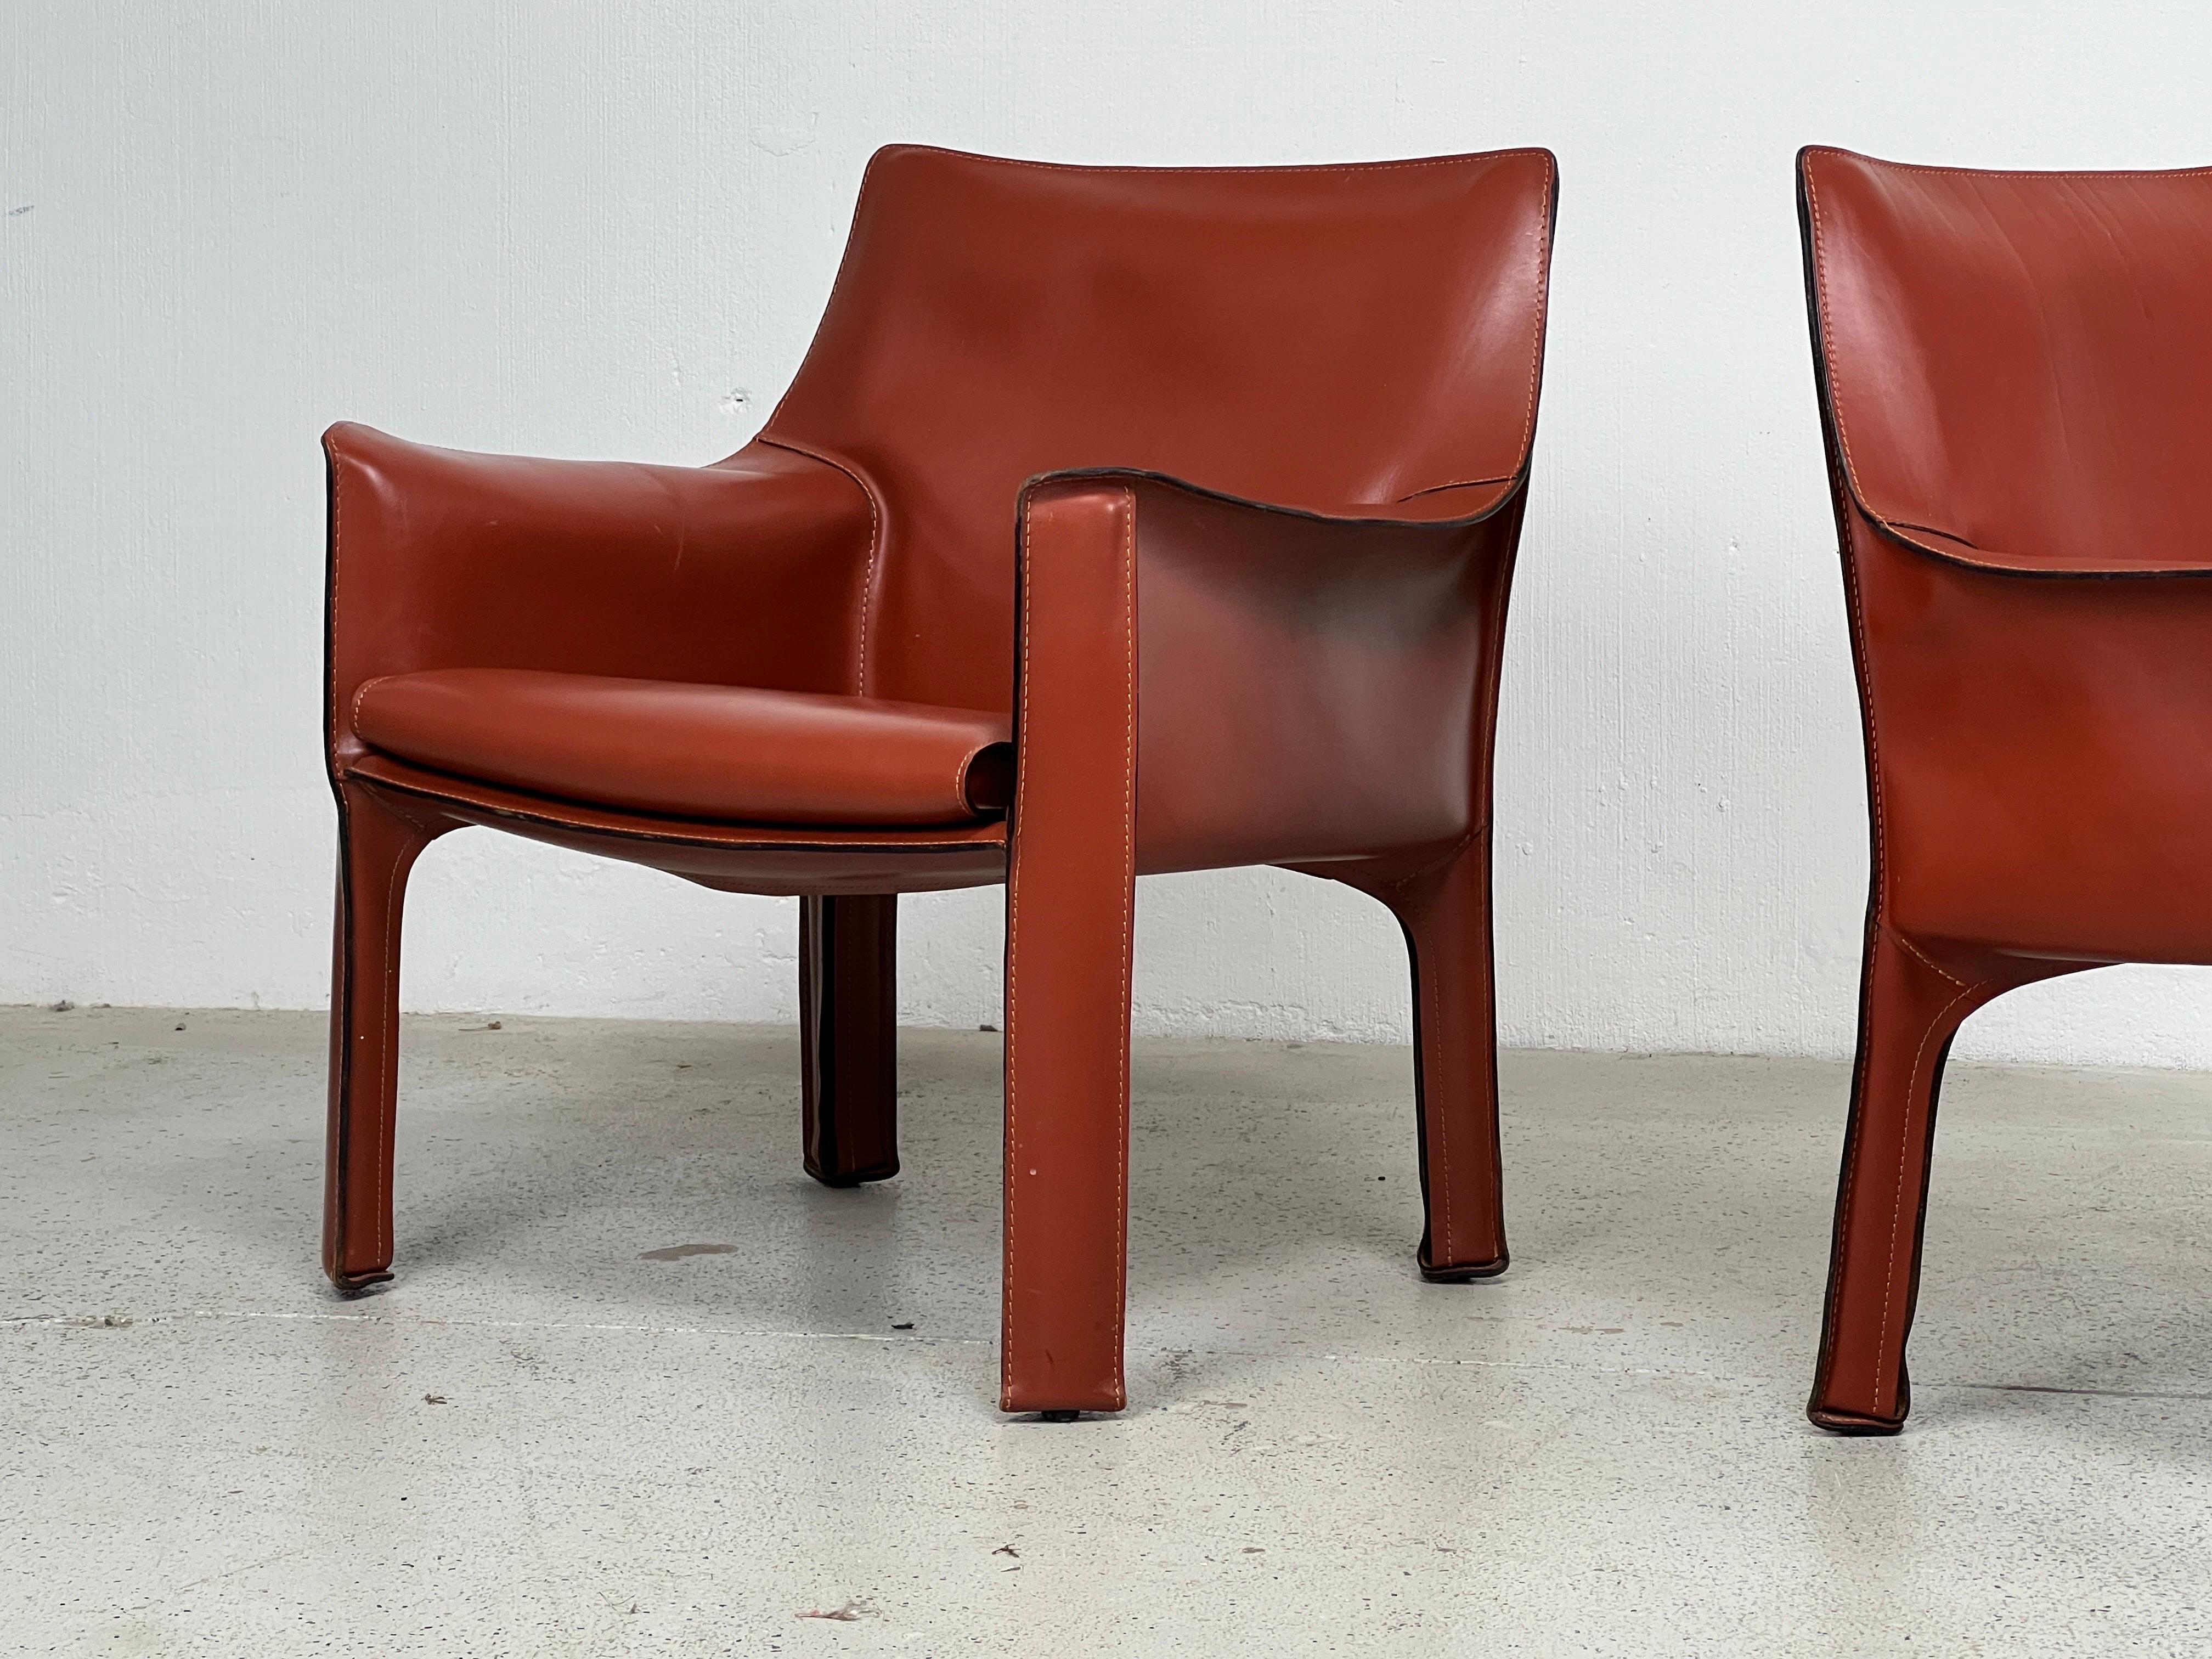 Late 20th Century Pair of Mario Bellini 414 Cab Lounge Chairs for Cassina For Sale